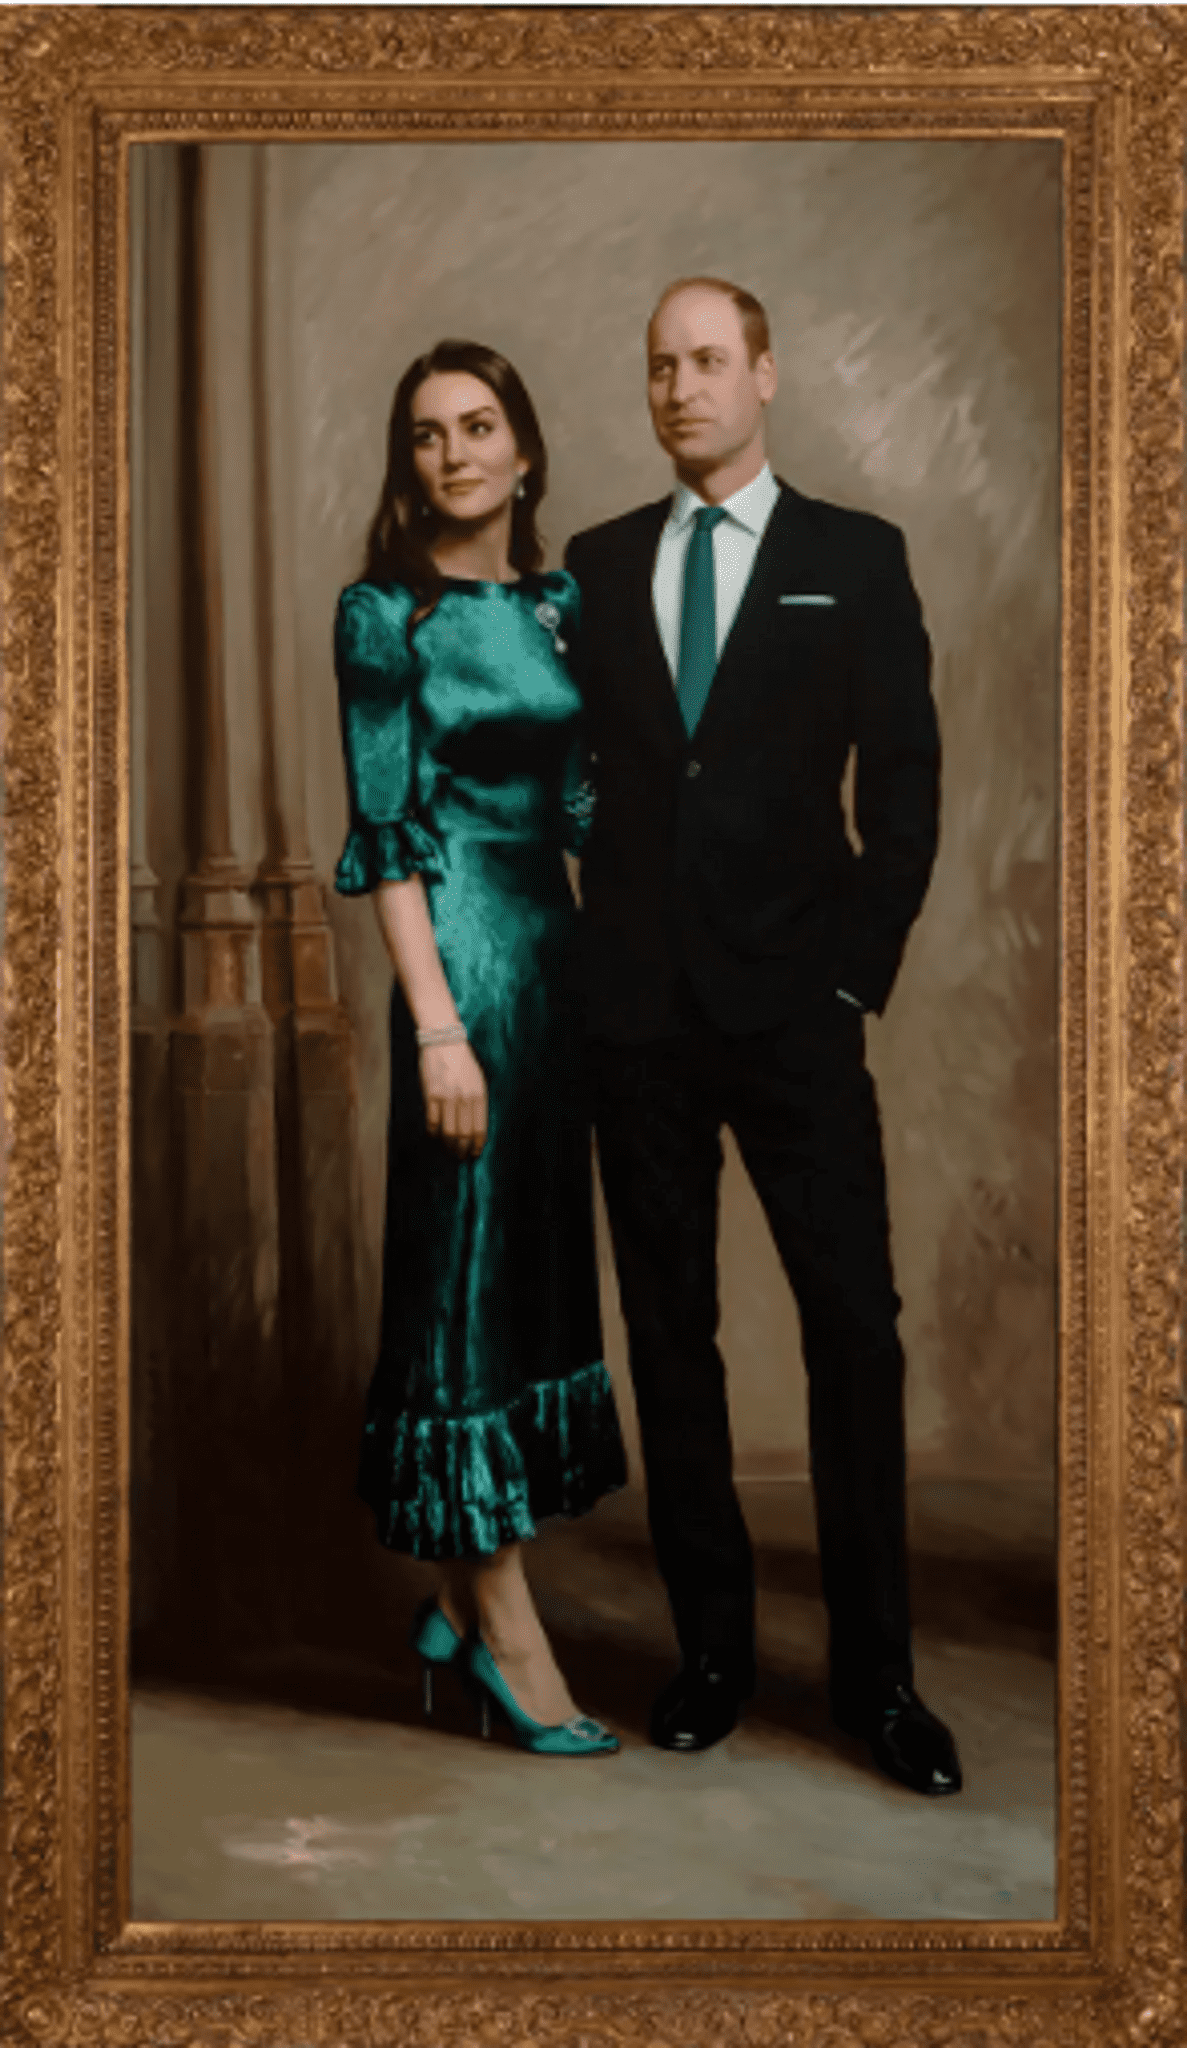 ”royal-foundation-reveals-the-first-official-portrait-of-kate-middleton-and-prince-william”